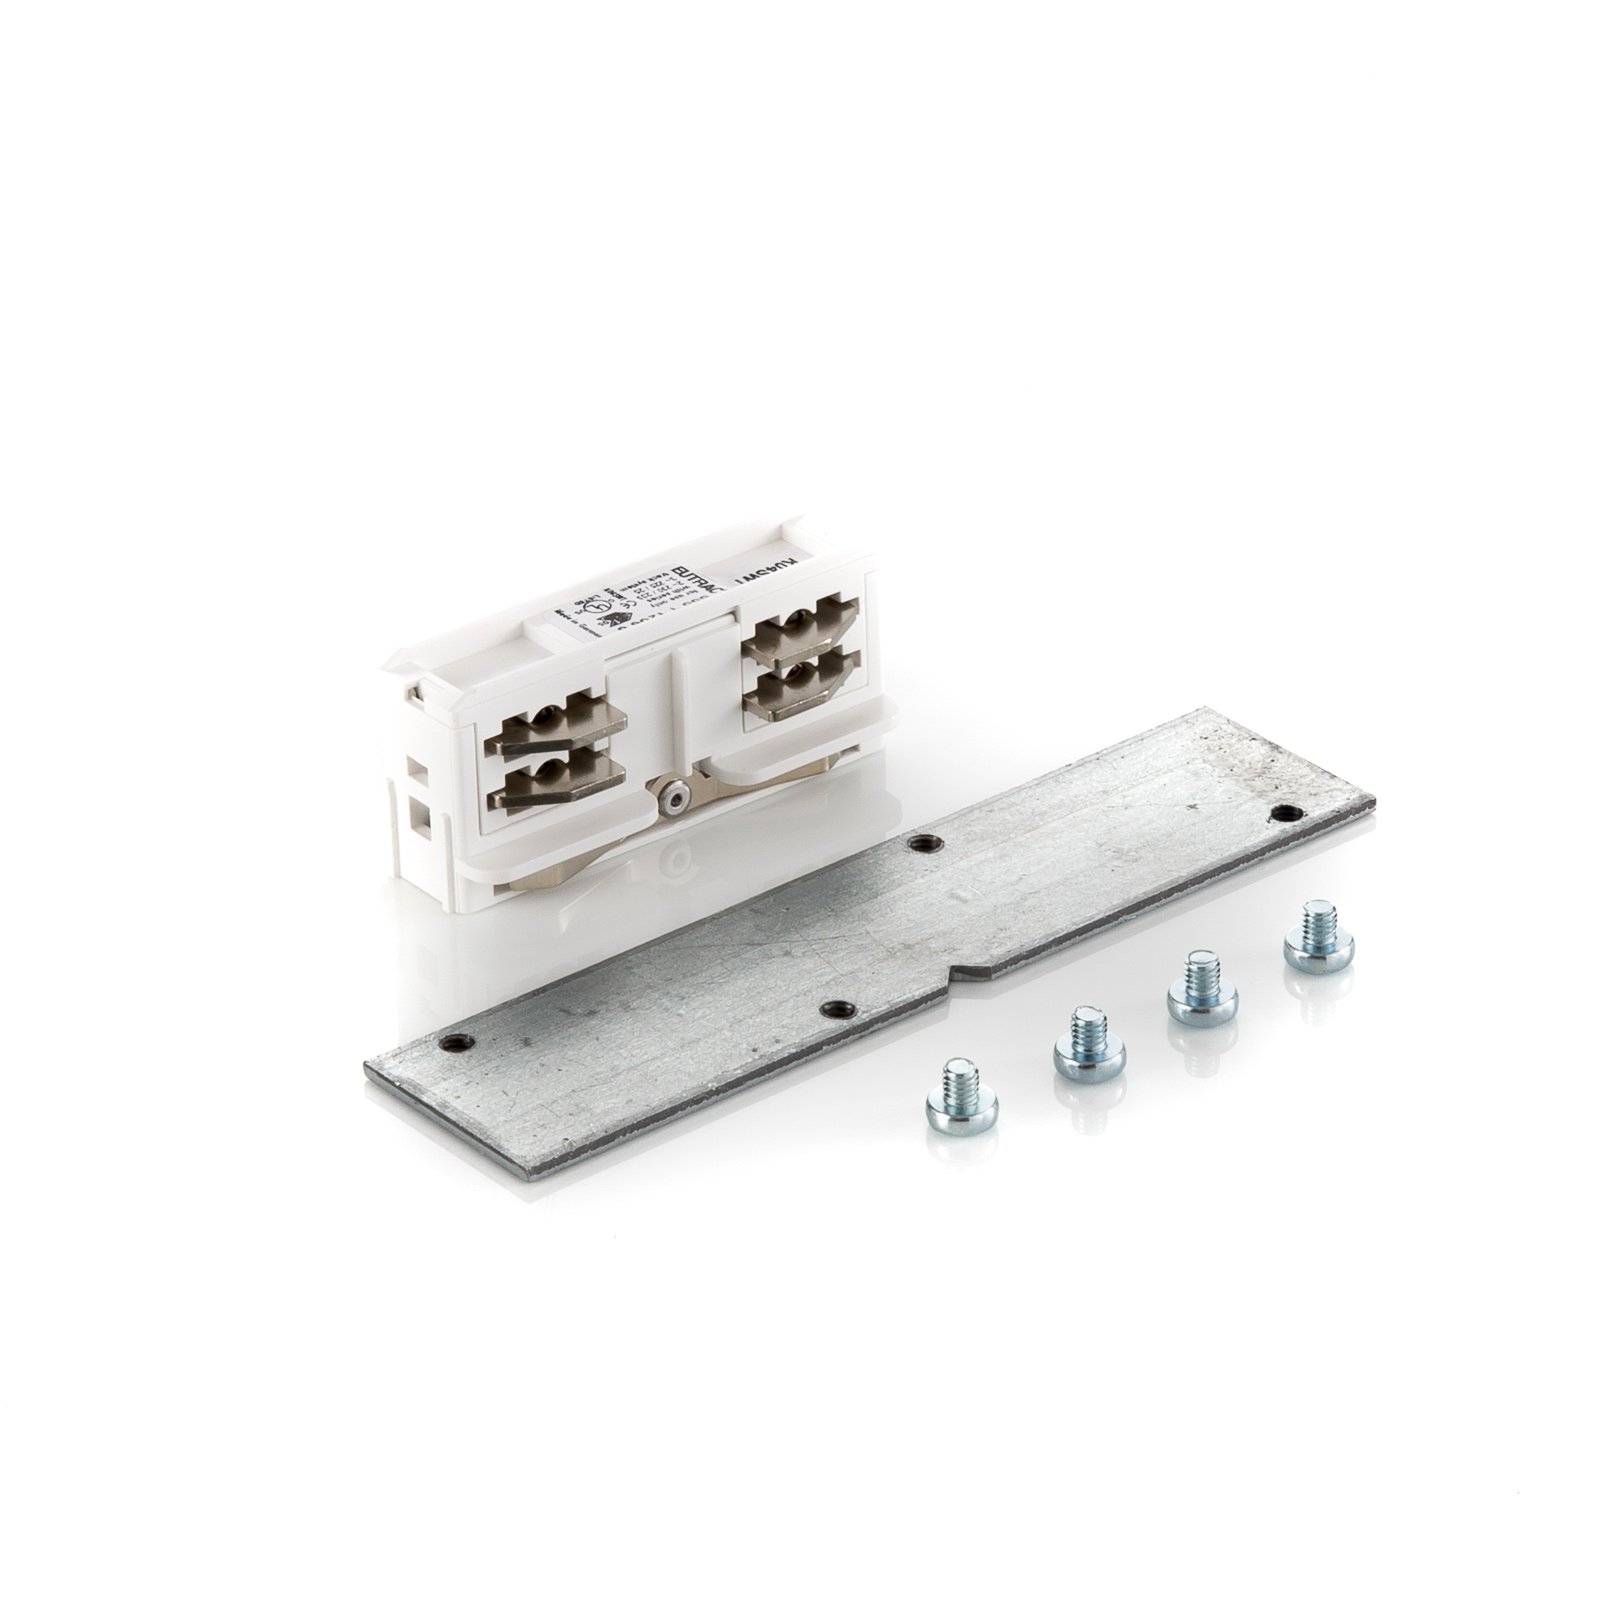 Eutrac longitudinal connector rcessed track, white